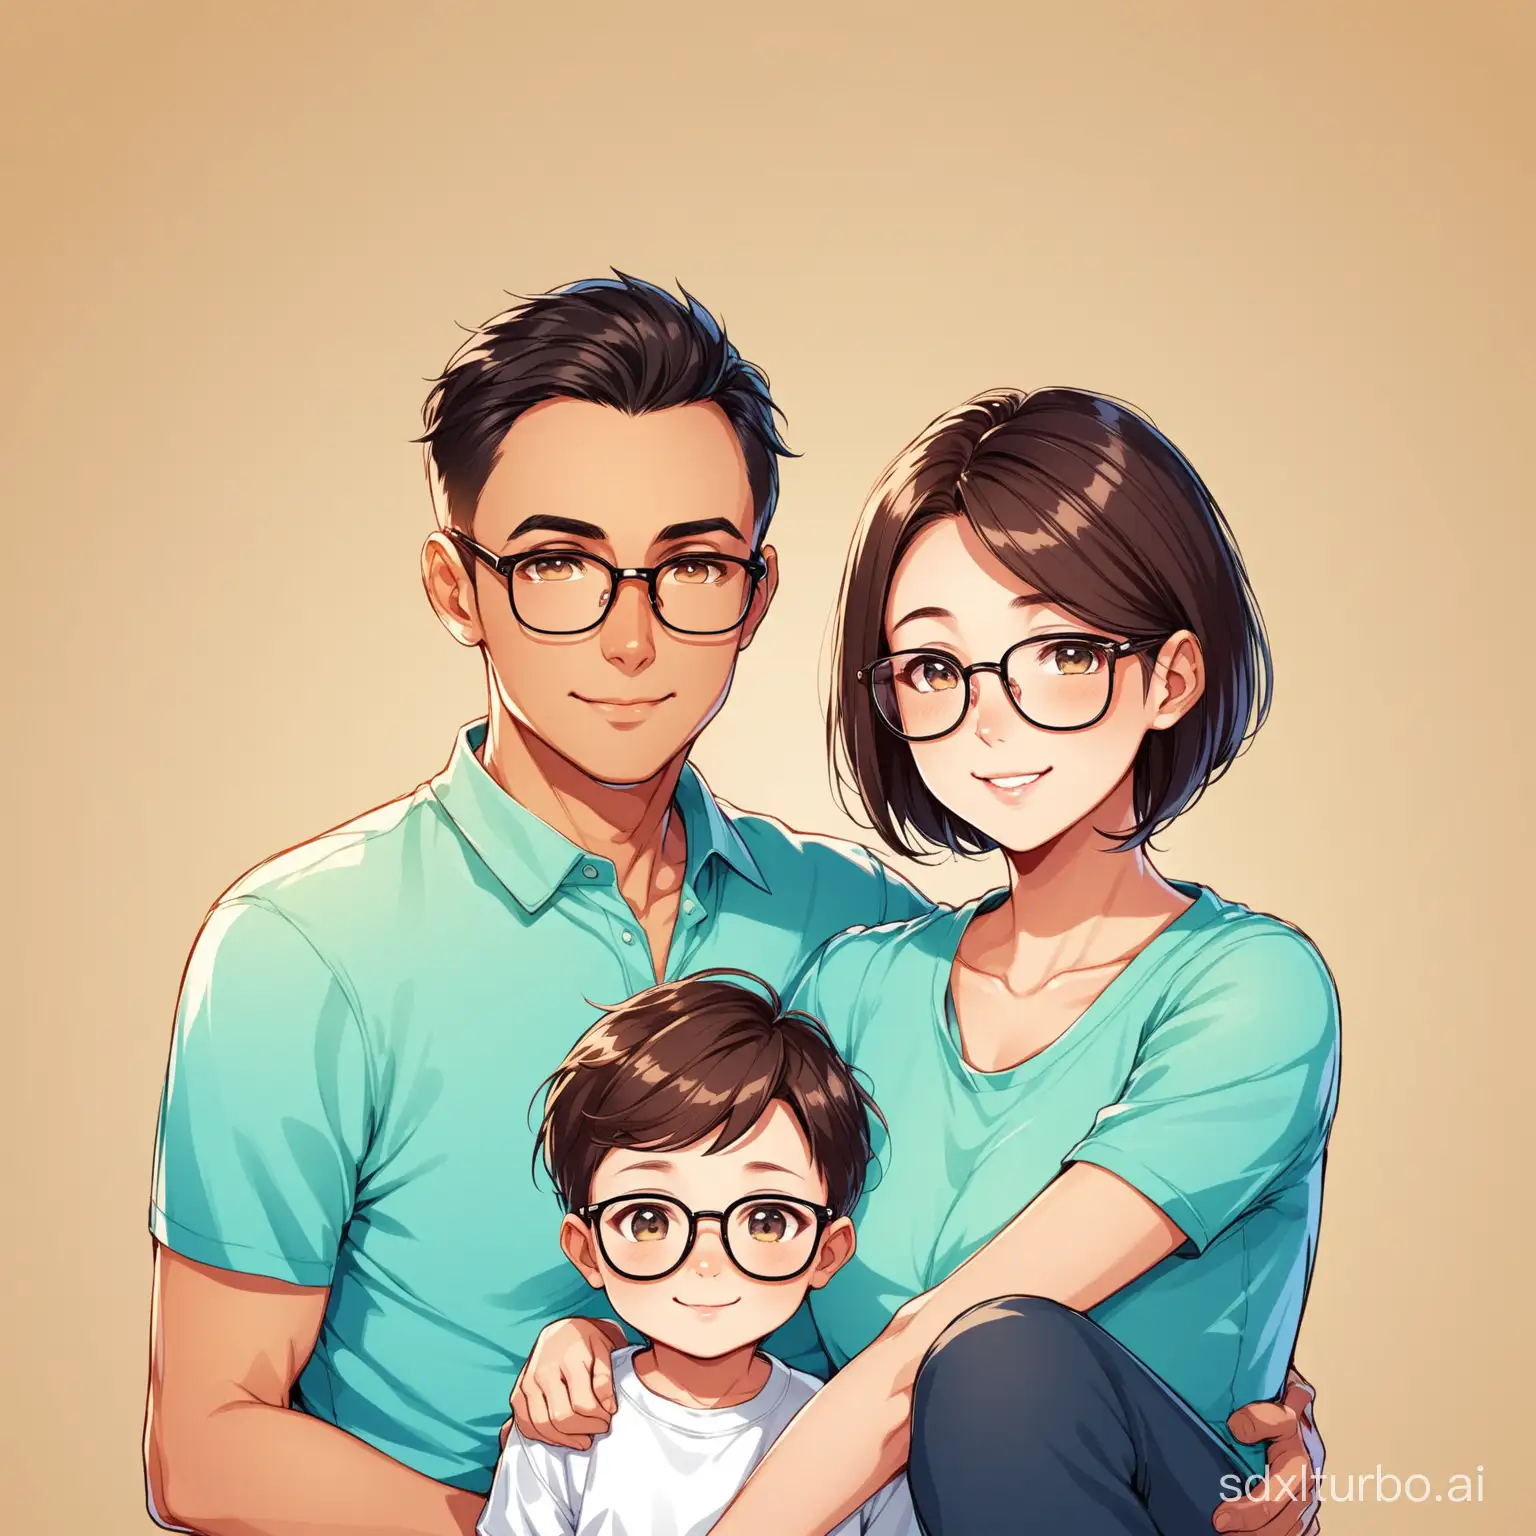 Happy-Family-Avatar-Little-Boy-Dad-with-Glasses-Mom-with-Short-Hair